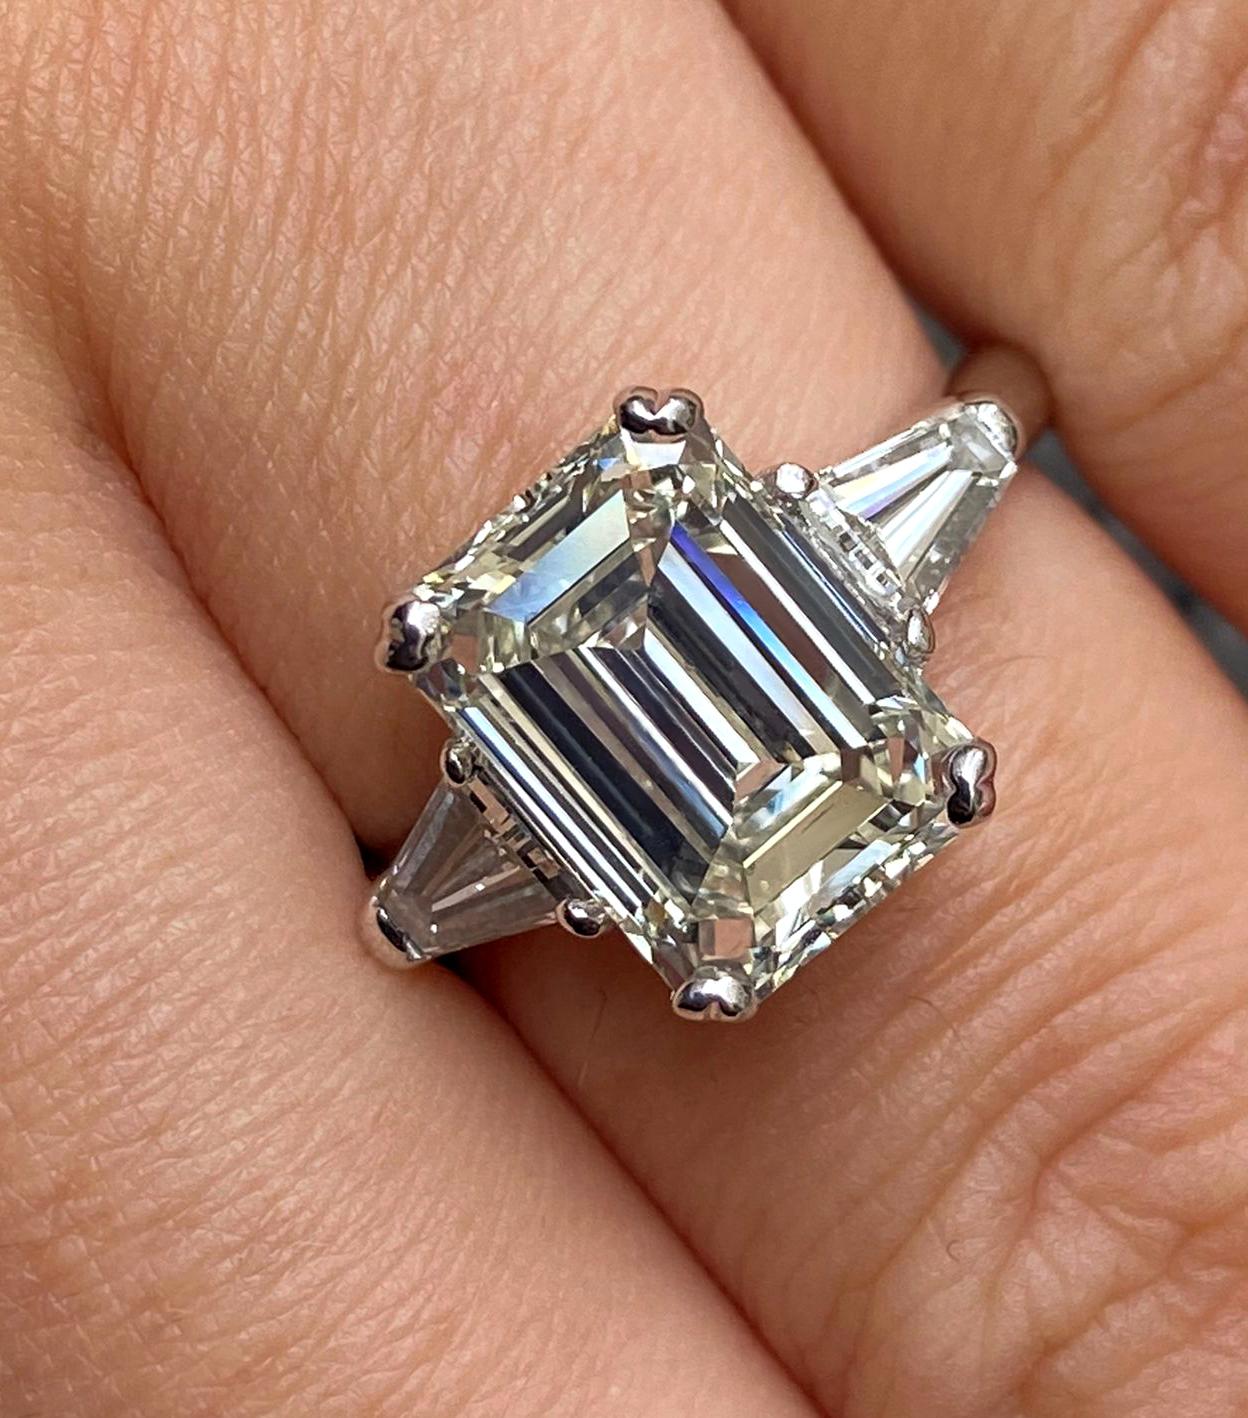 GIA 3.75ctw Estate Vintage Emerald Cut Diamond 3Stone Engagement Wedding Ring WG Plus 2 loose trapezoid cut diamonds.
There is nothing more ELEGANT and CLASSIC than a Three-Stone Diamond ring with an EMERALD cut Diamond!
The total Diamond Weight is